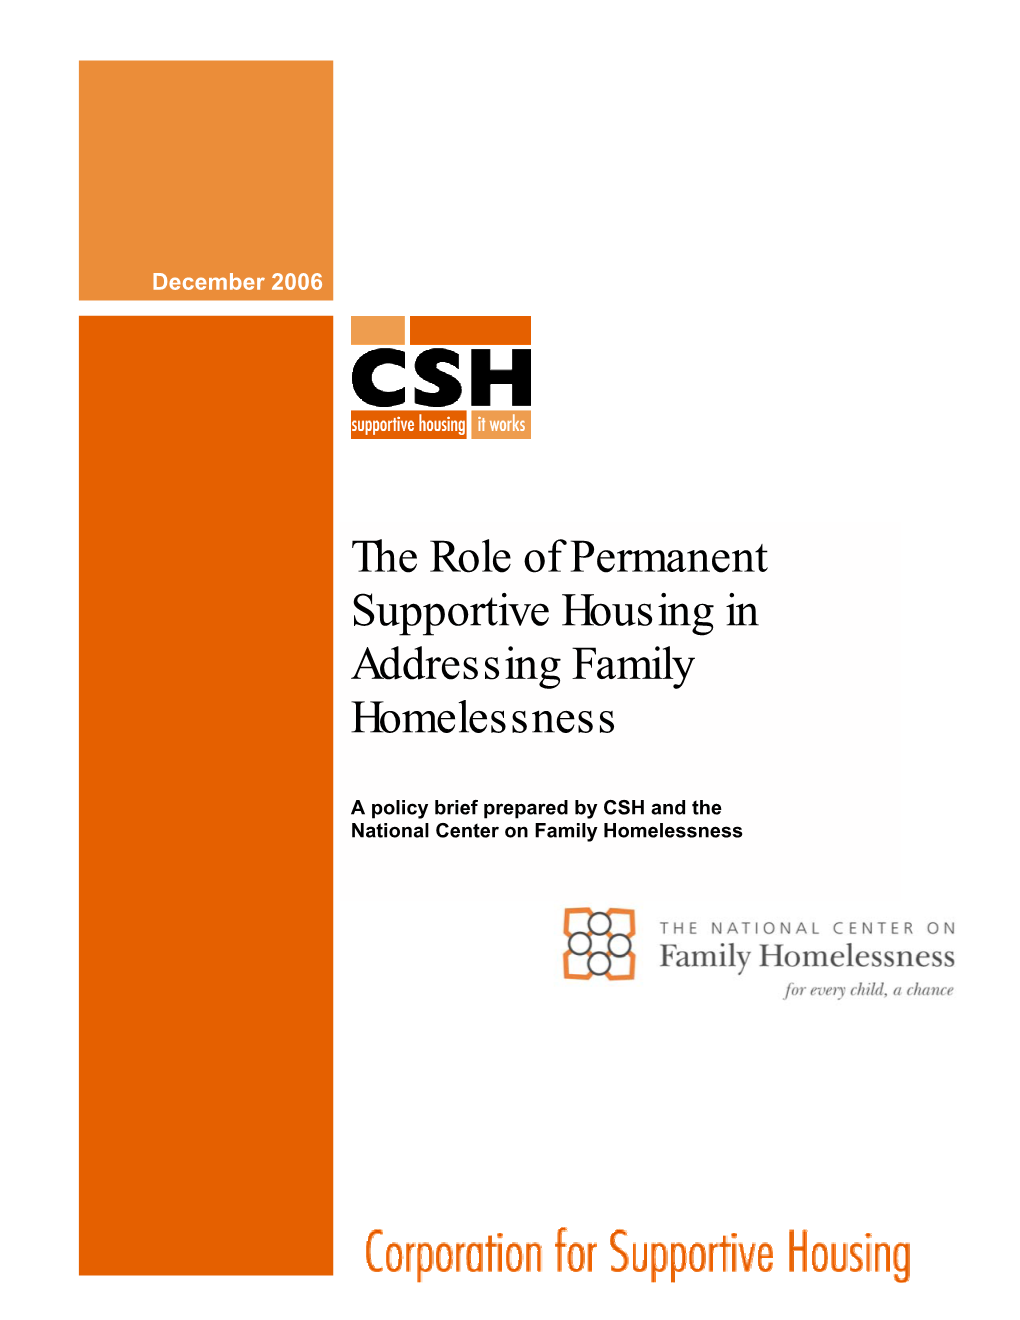 The Role of Permanent Supportive Housing in Addressing Family Homelessness